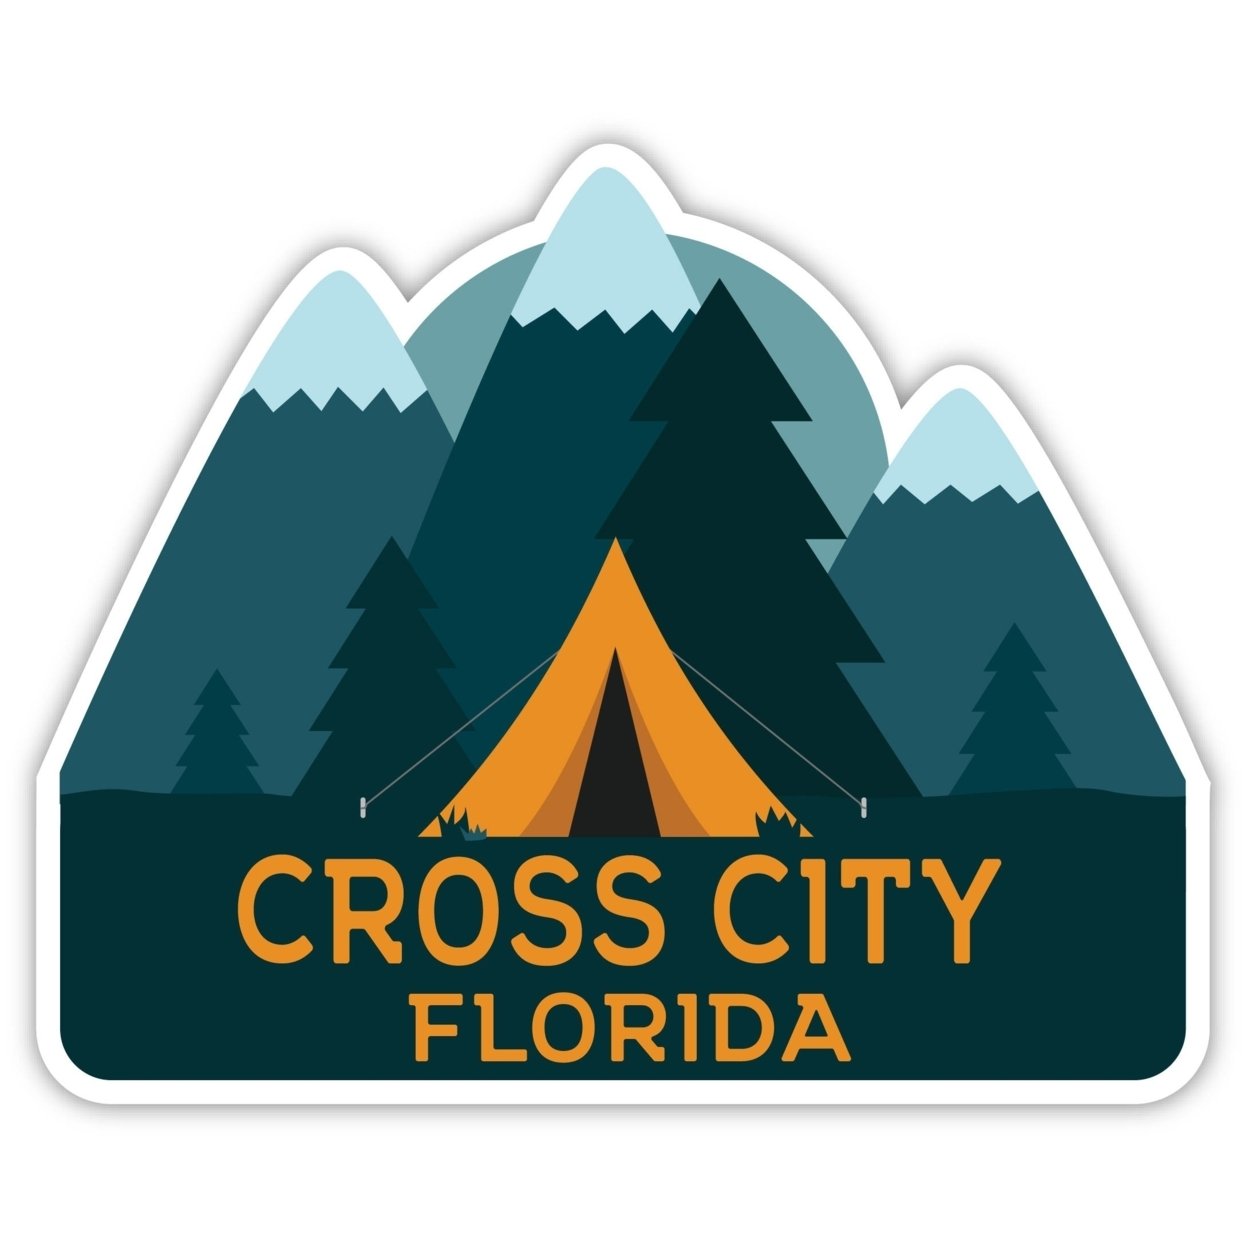 Cross City Florida Souvenir Decorative Stickers (Choose Theme And Size) - 4-Pack, 4-Inch, Tent